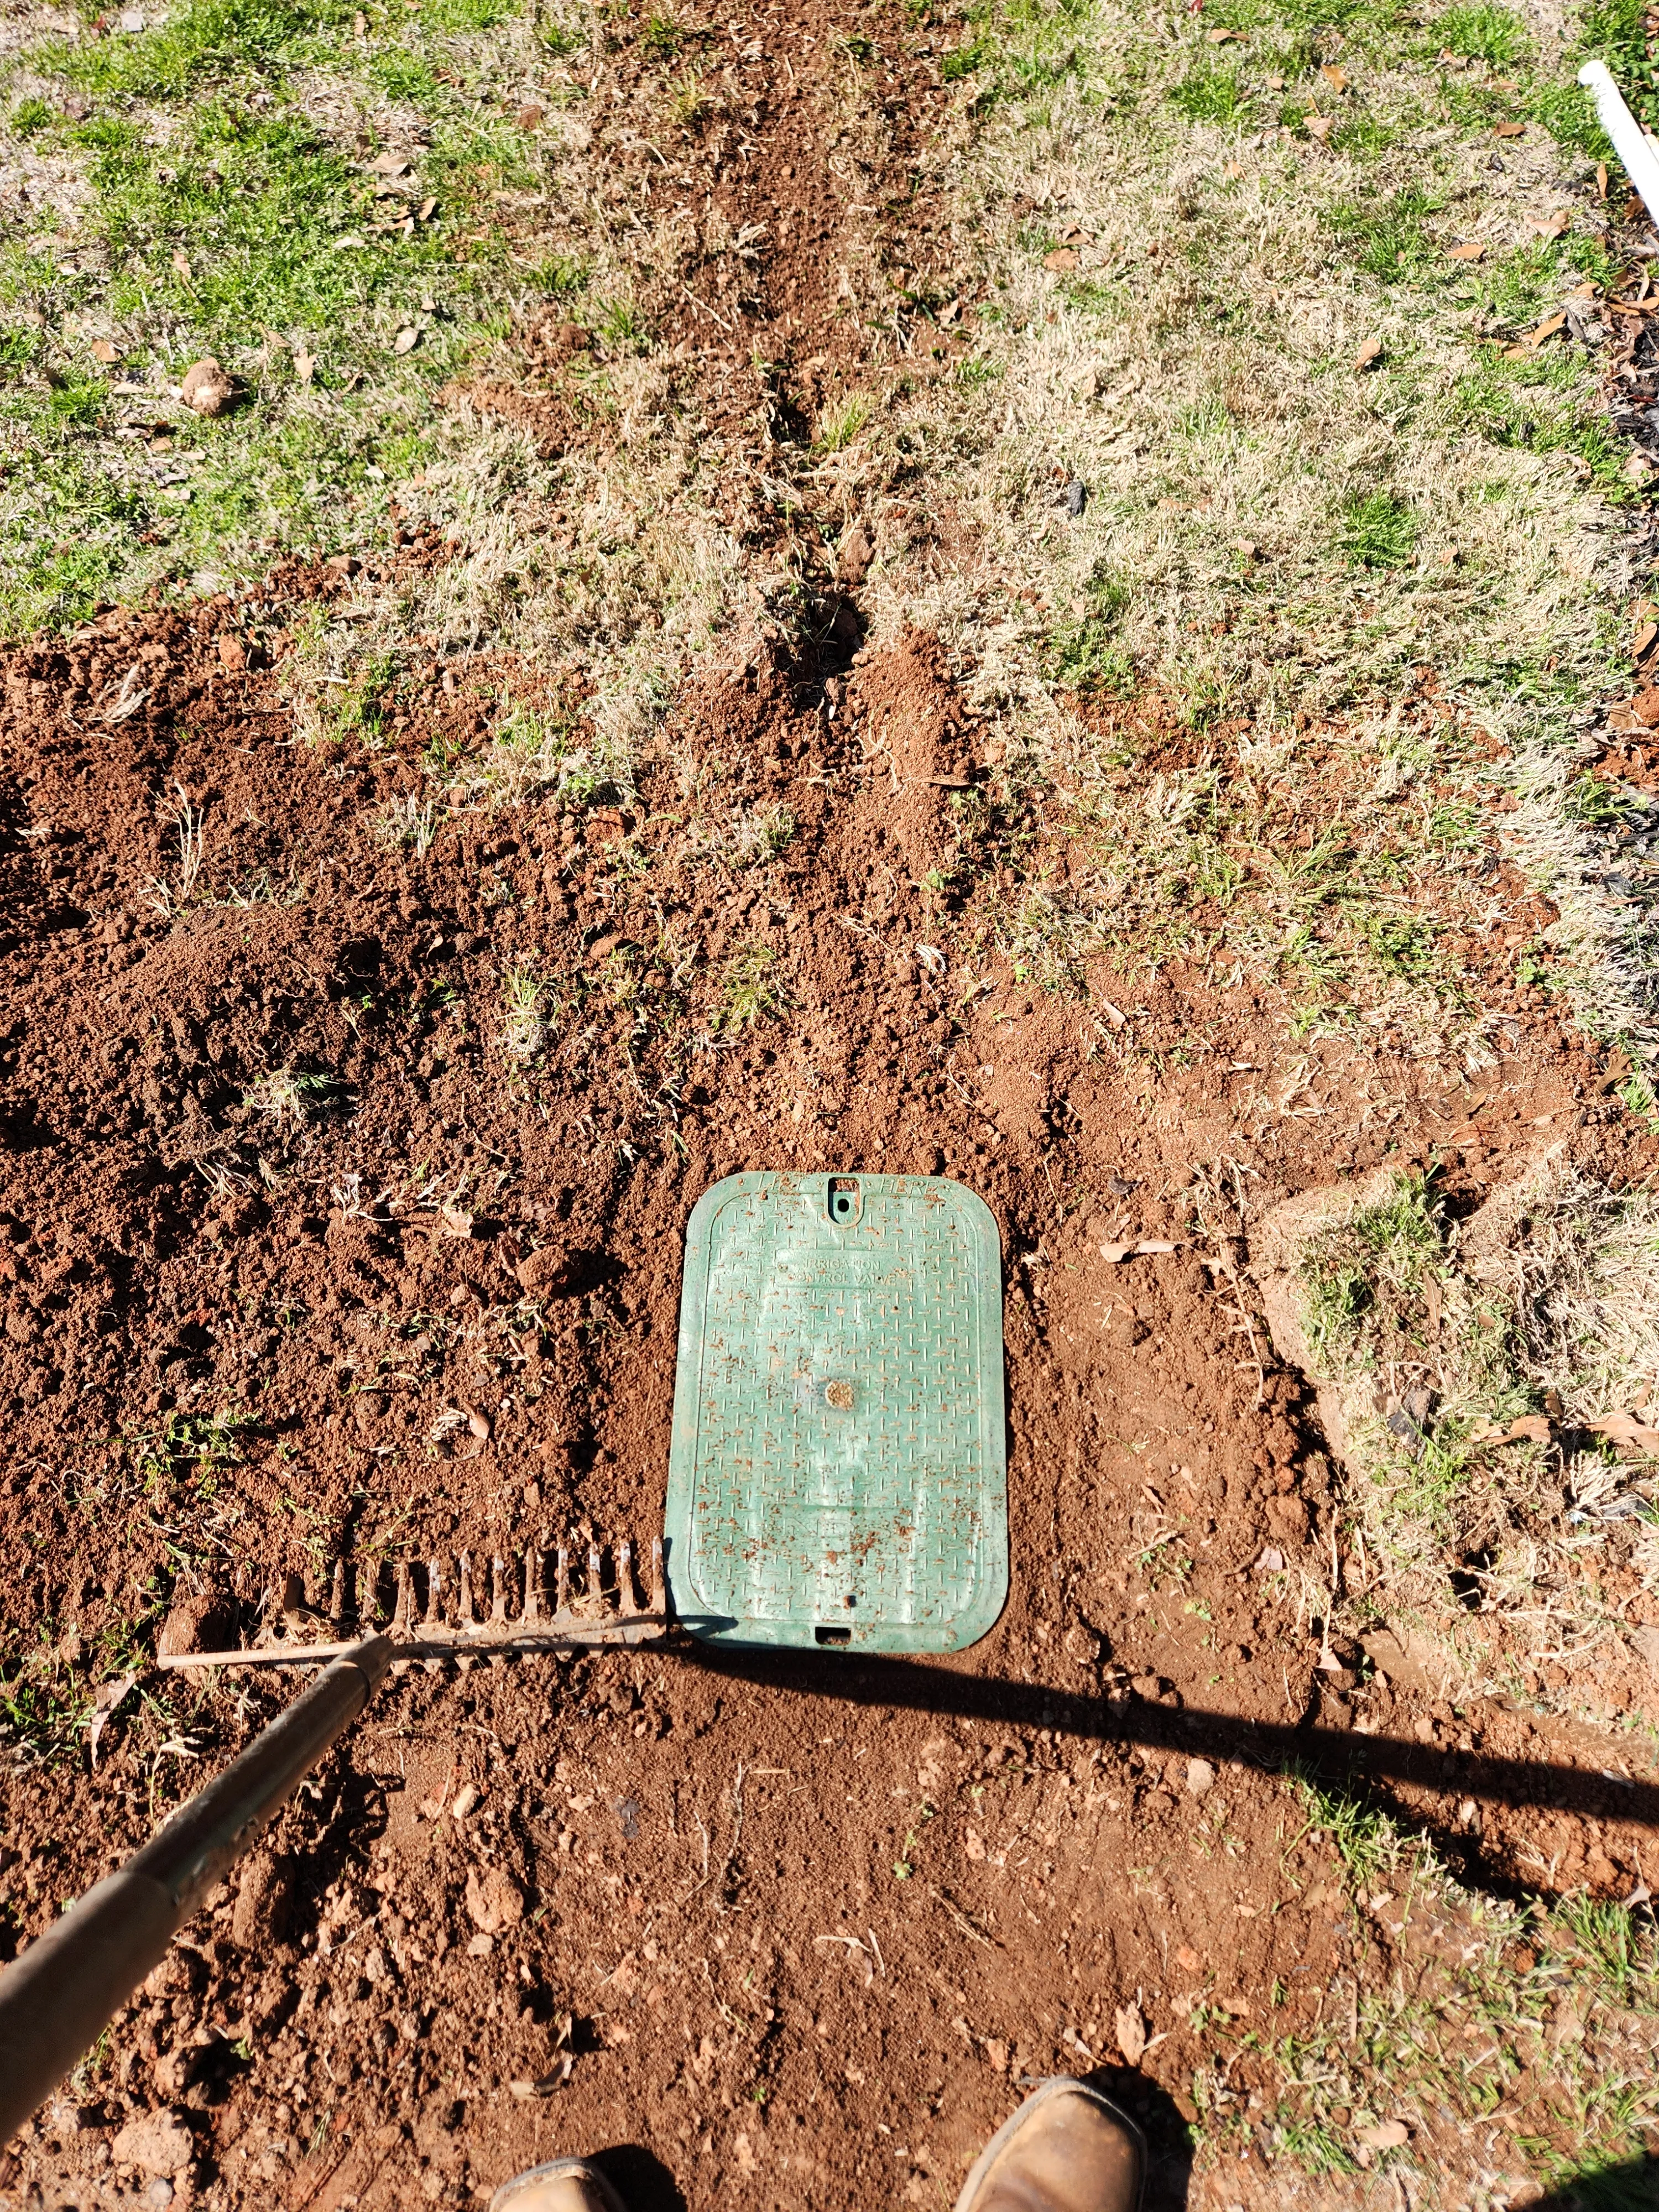 Drainage Installation for AW Irrigation & Landscape in Greer, SC